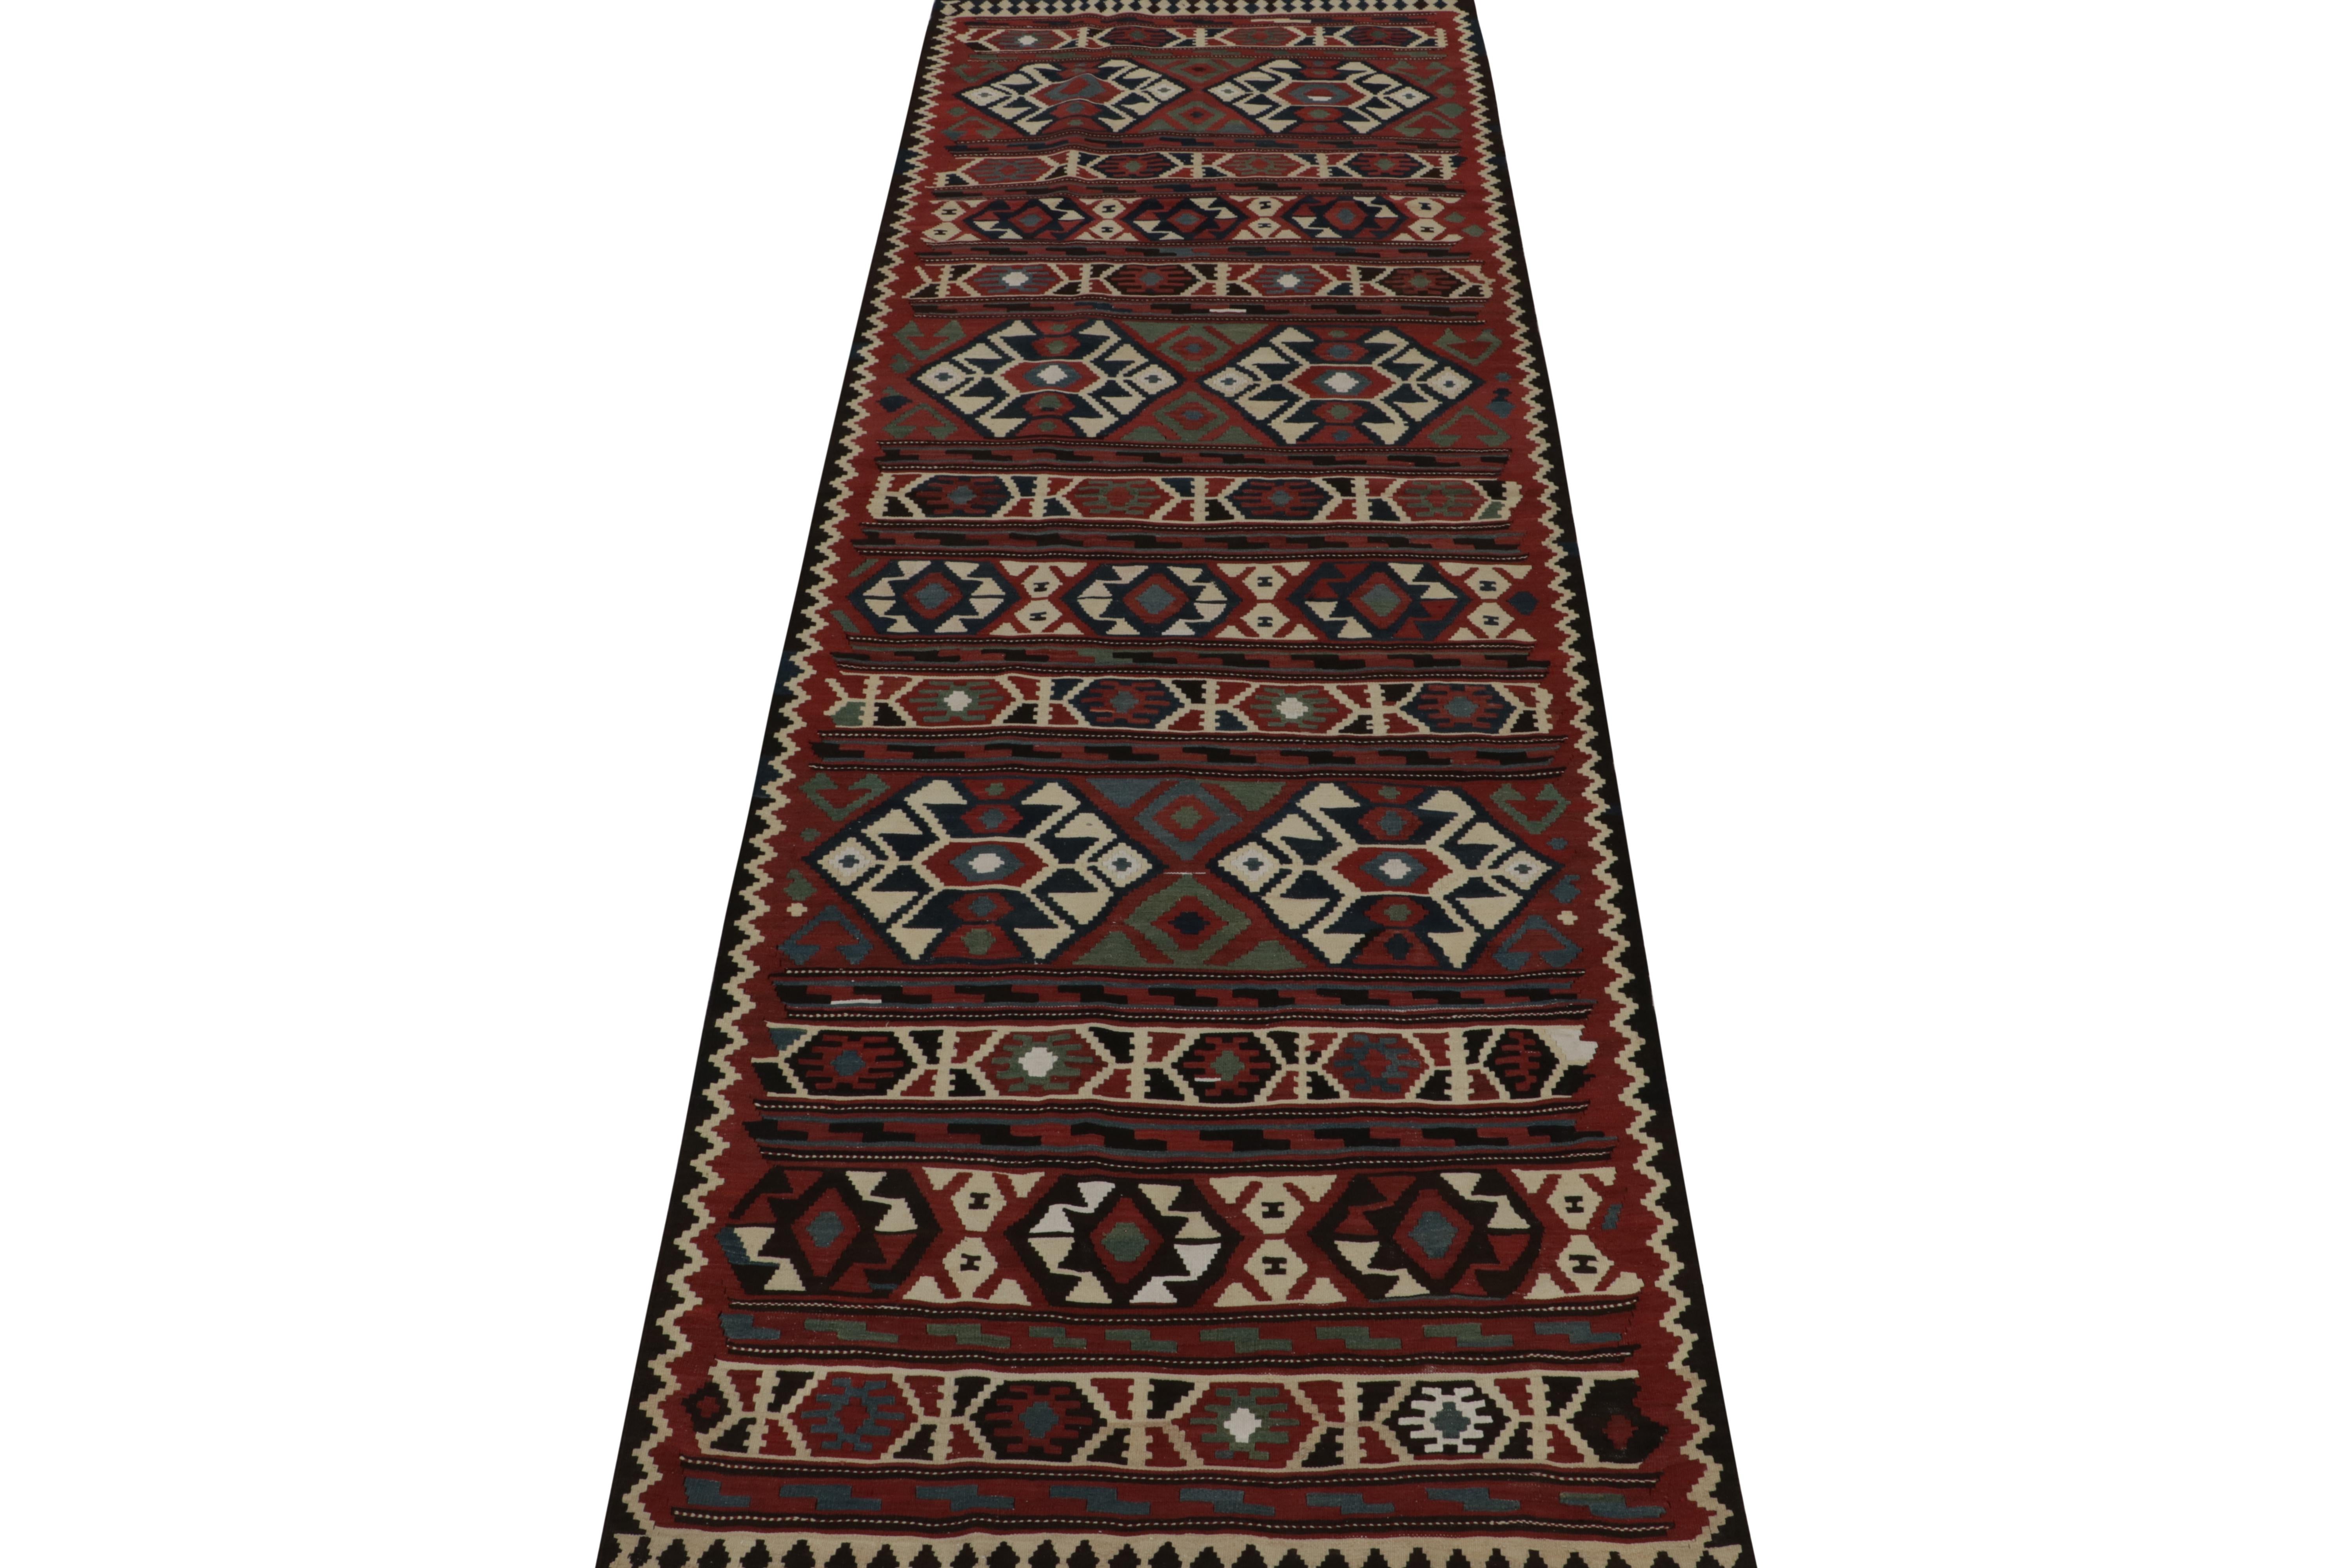 This vintage 5x15 Persian kilim is a rare, extra-long gallery rug—handwoven in wool circa 1950-1960.

Further on the Design:

A brick red background hosts traditional tribal motifs in navy blue, teal, and off-white colors that have kept up